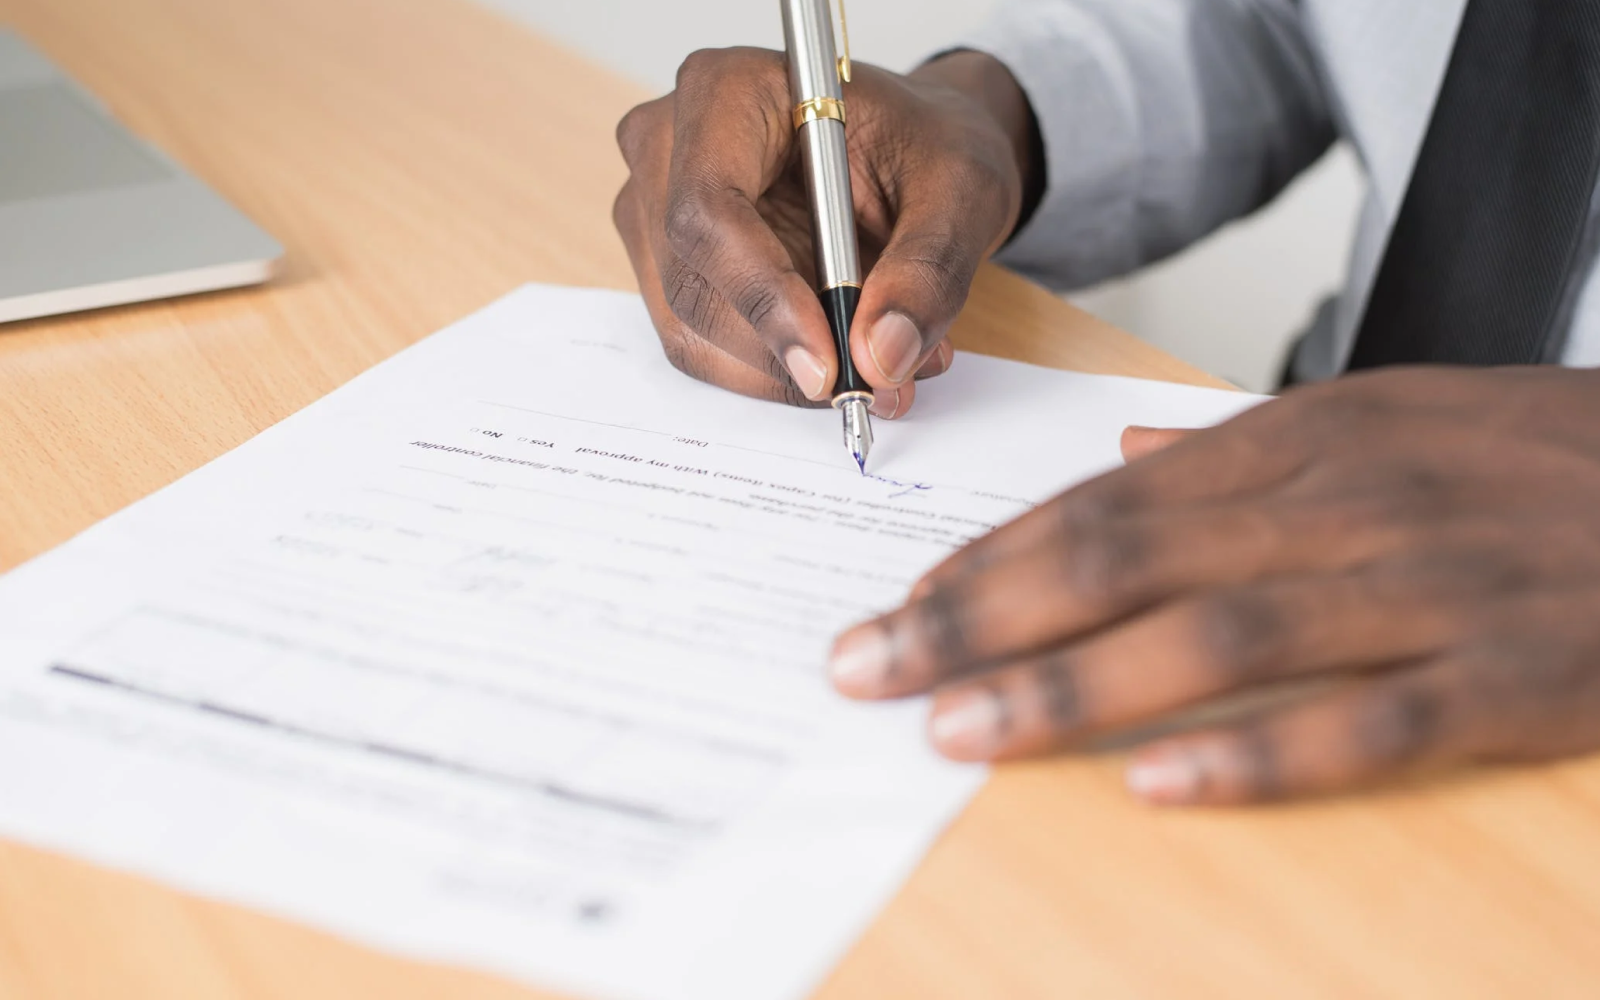 Image of a renter filling out an apartment application form